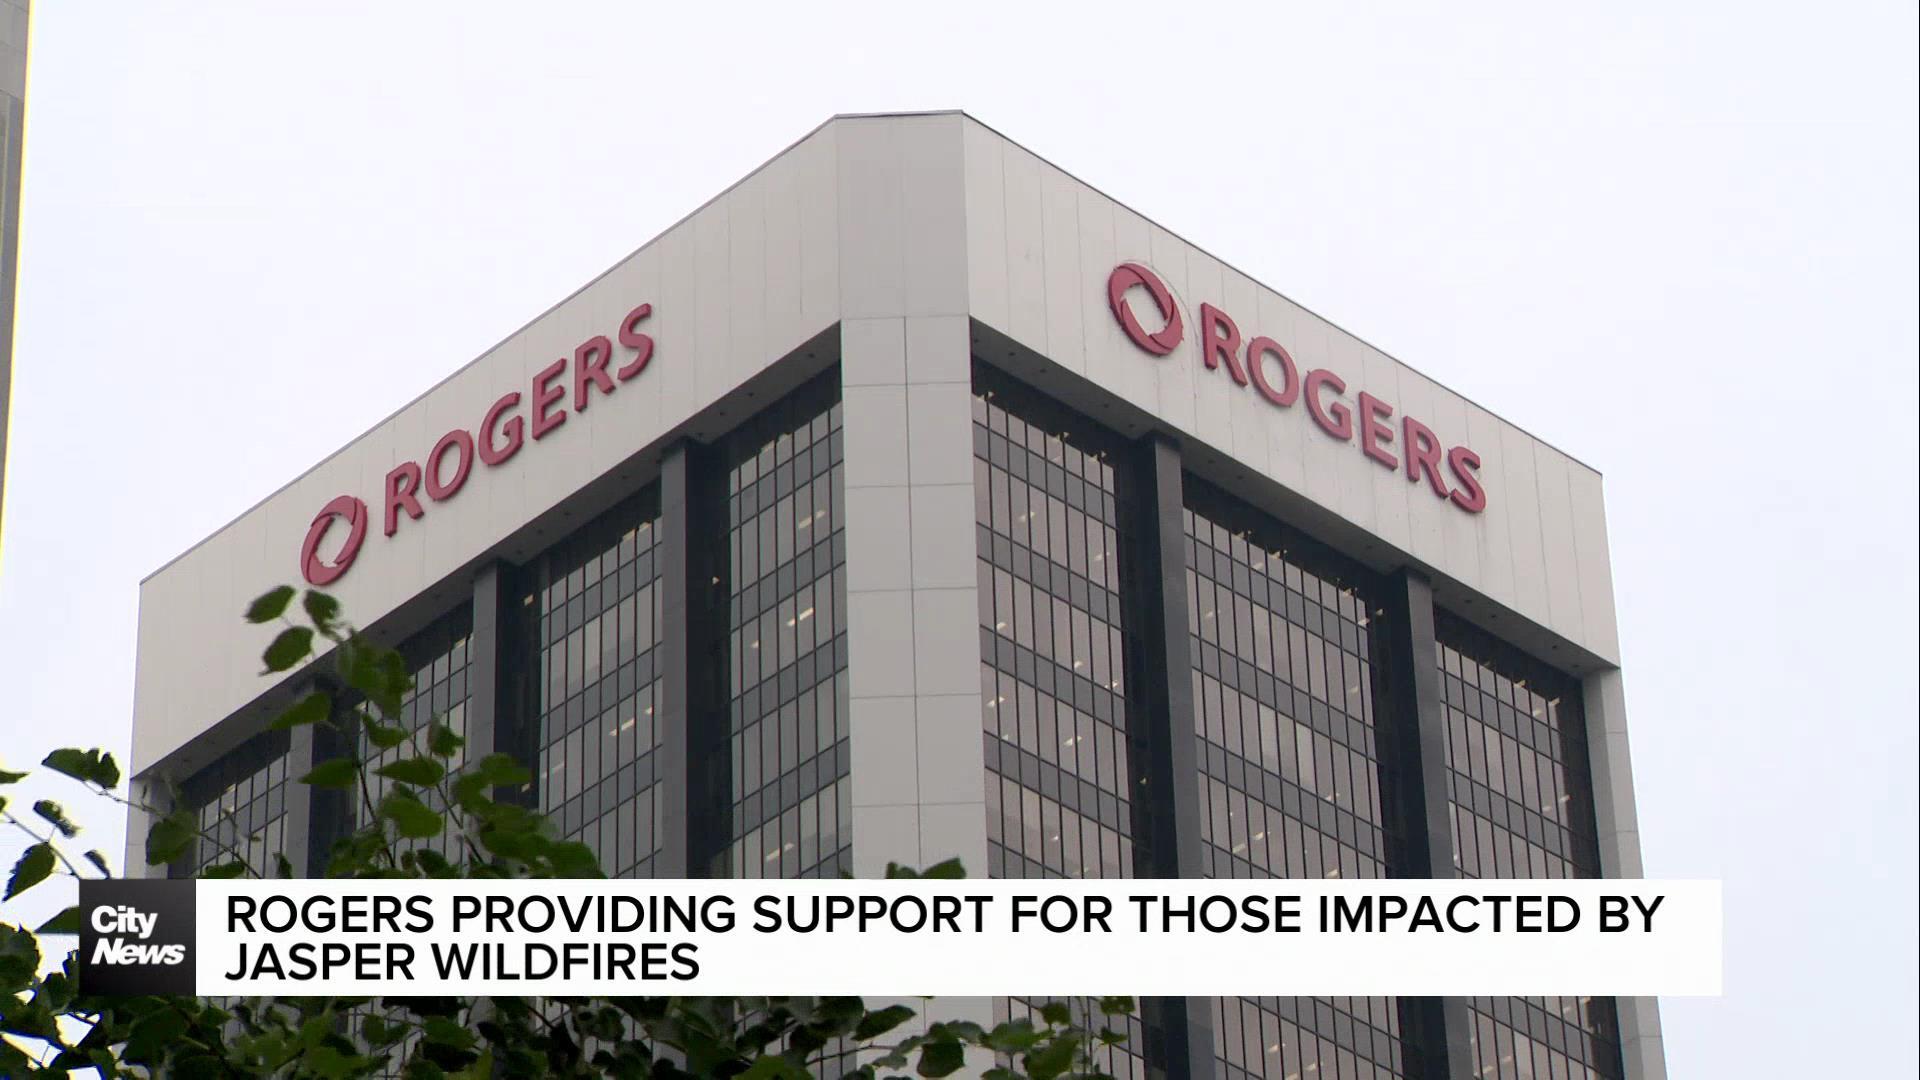 Rogers providing support for those impacted by Jasper wildfires